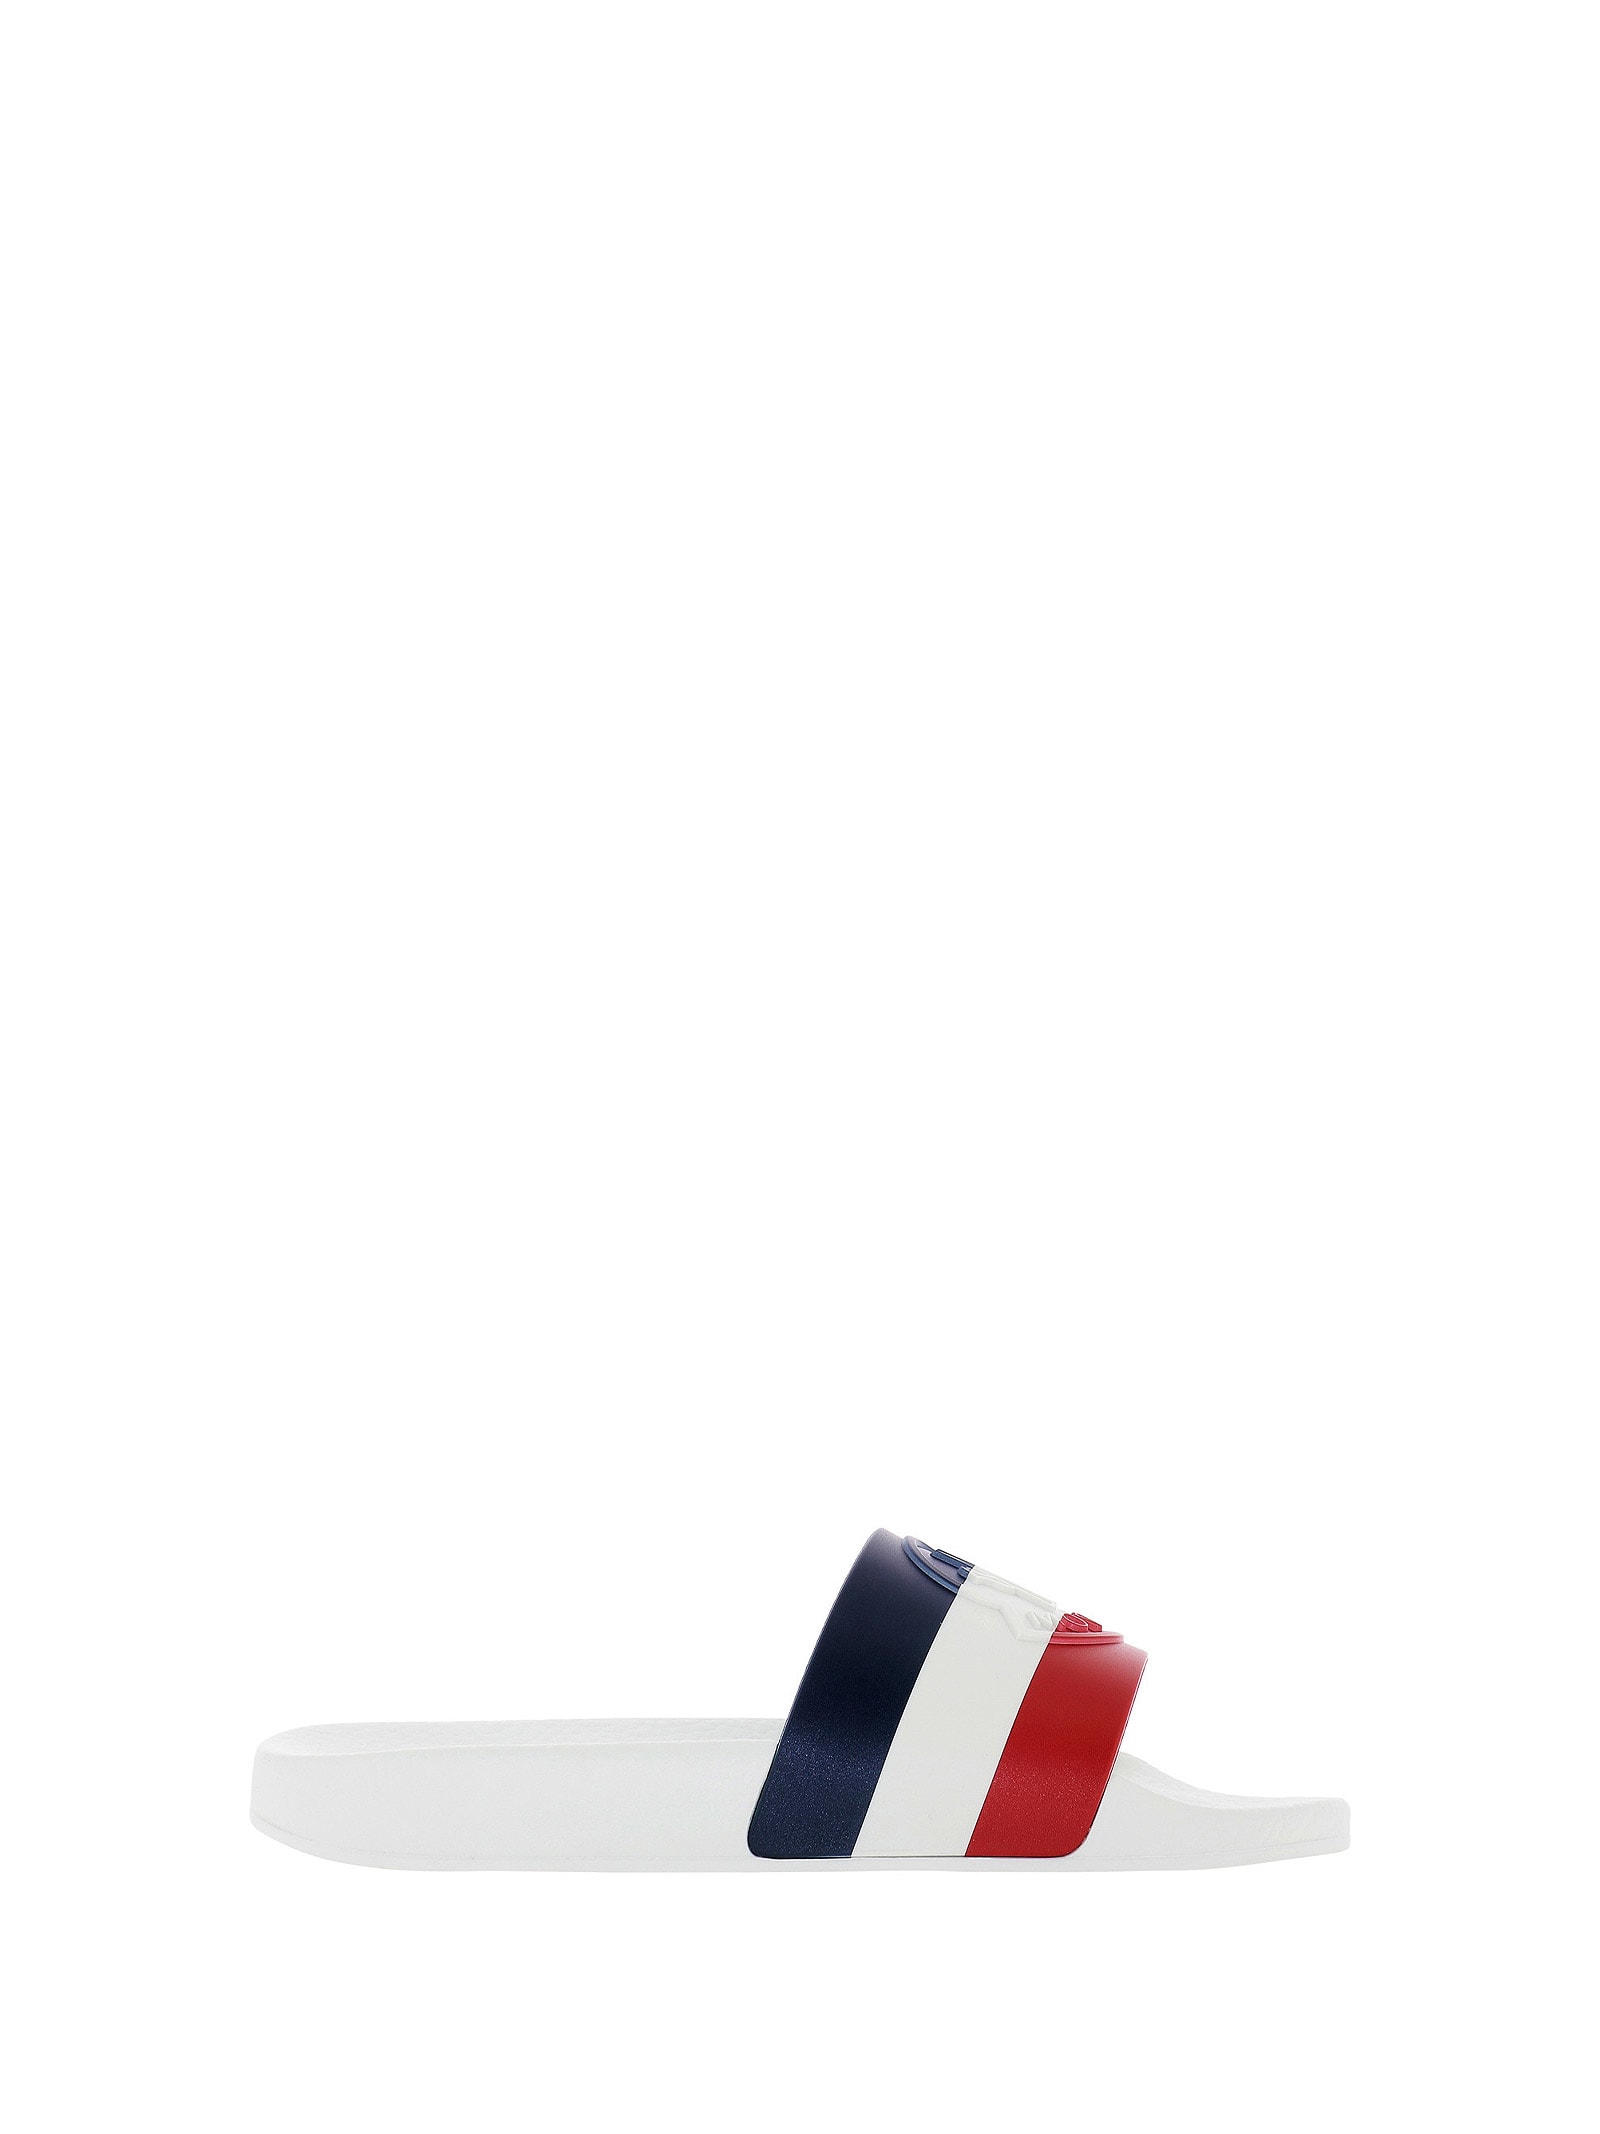 Buy Moncler Moncler Logo Embossed Slides online, shop Moncler shoes with free shipping